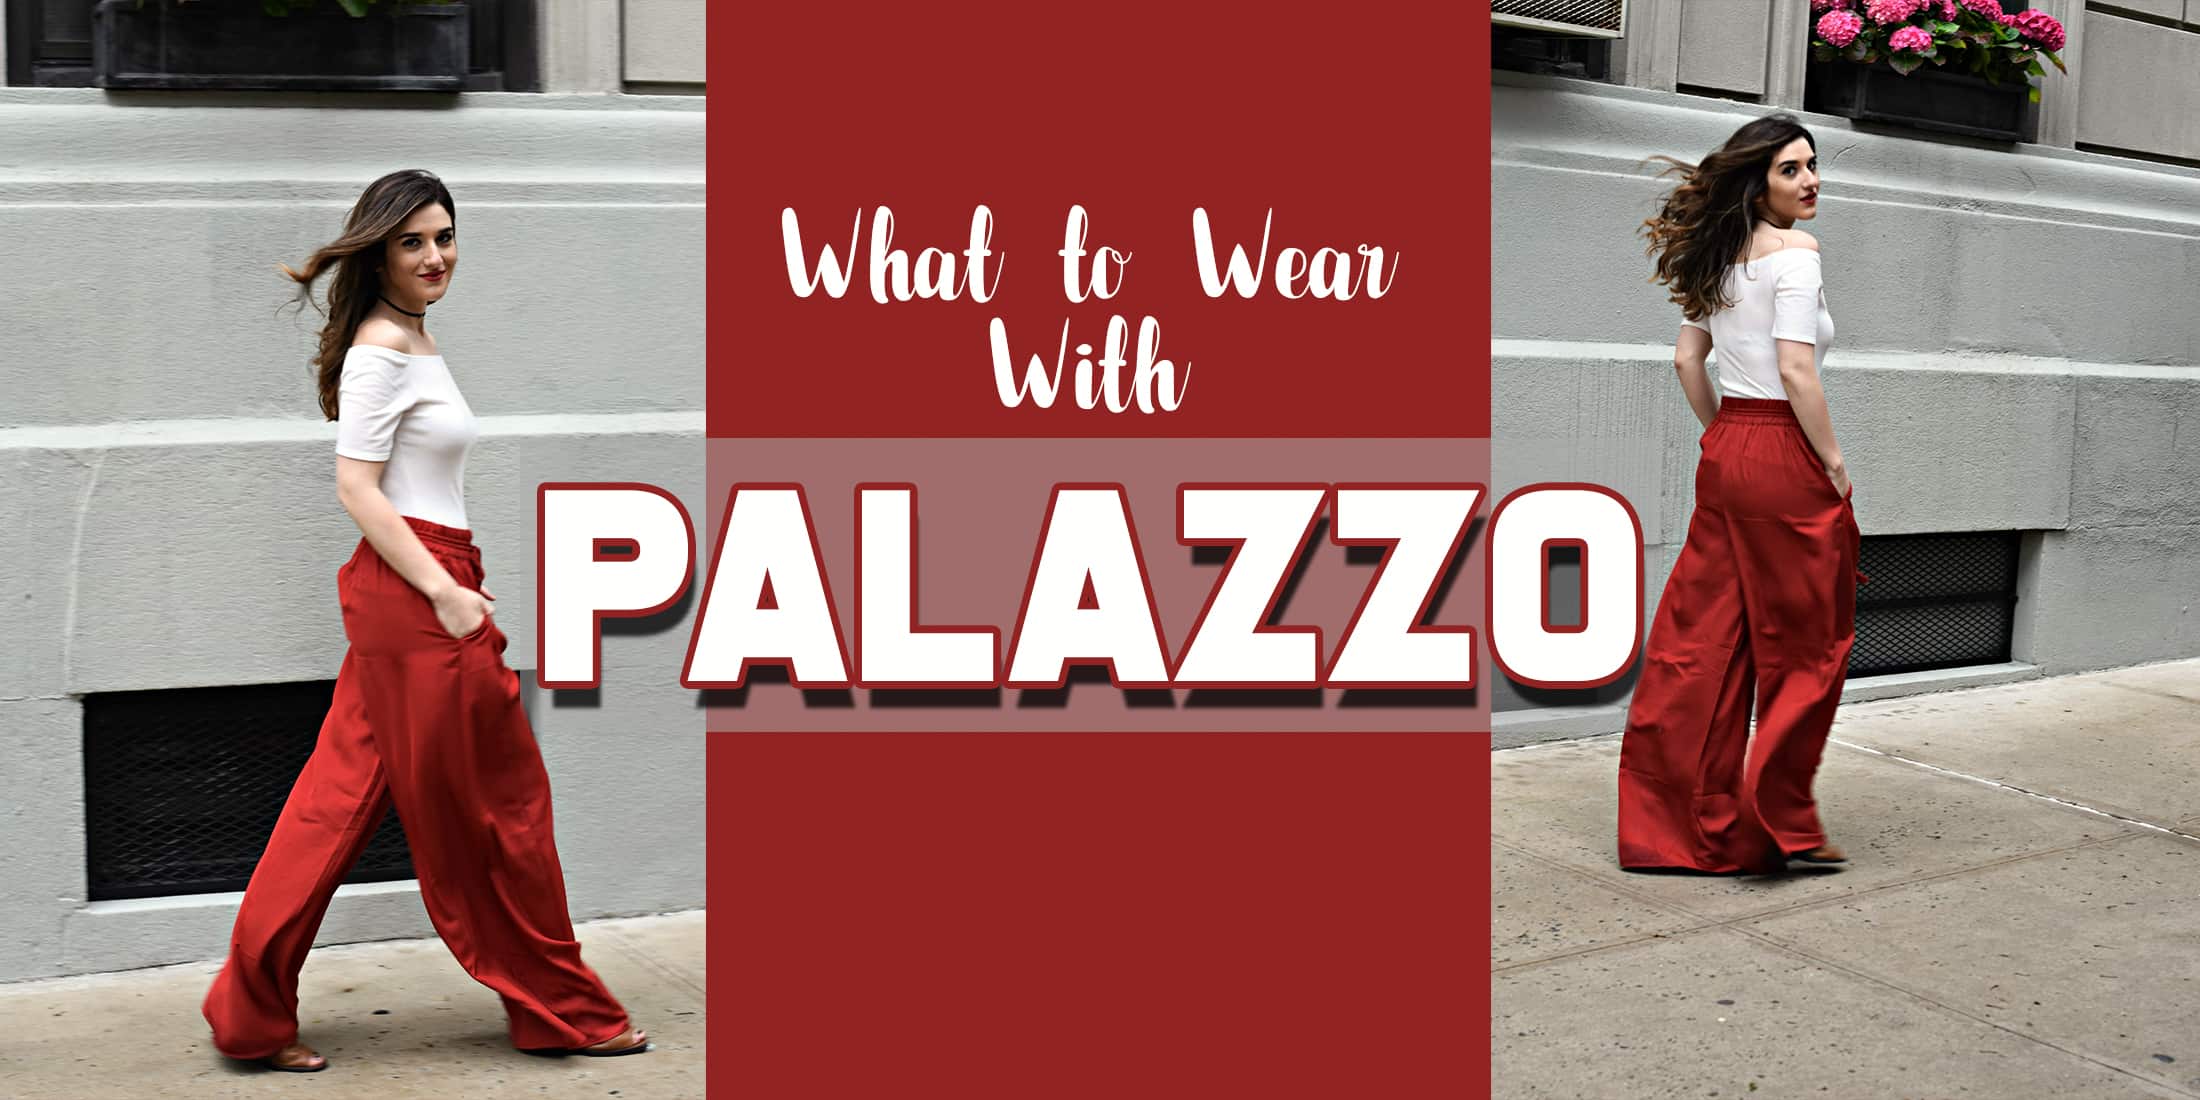 how to wear the palazzo | High waisted palazzo pants, Fashion, Pantsuits  for women